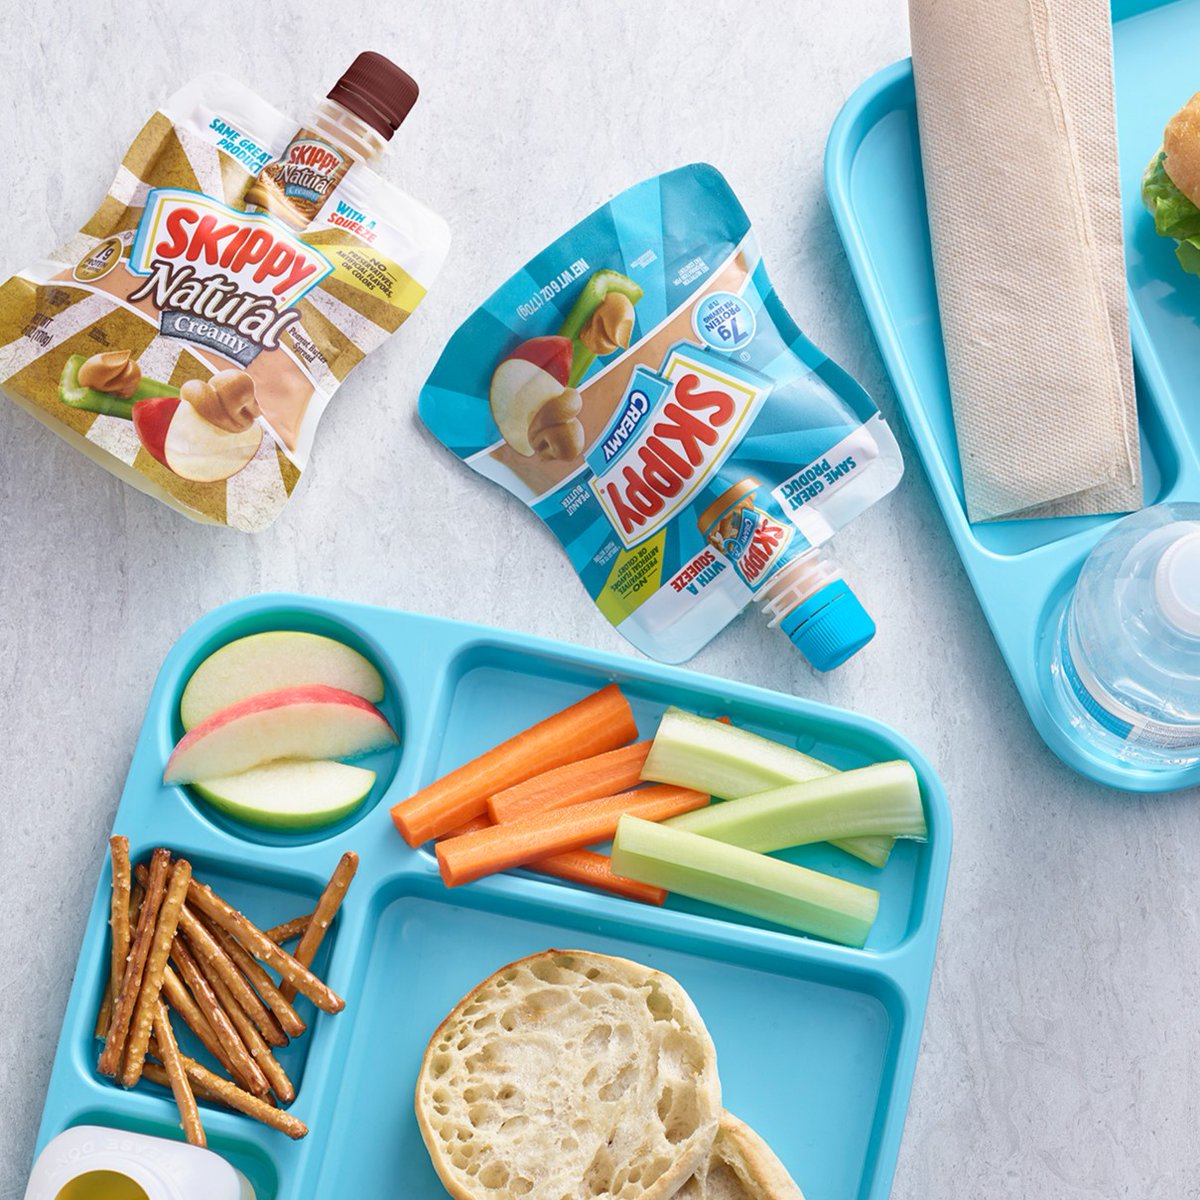 As the school bells ring and backpacks are packed, there's one thing you can always count on: the comforting taste of peanut butter. Whether it's the PB&J sandwich for lunch or an energizing peanut butter snack between classes, we've got your back-to-school cravings covered.